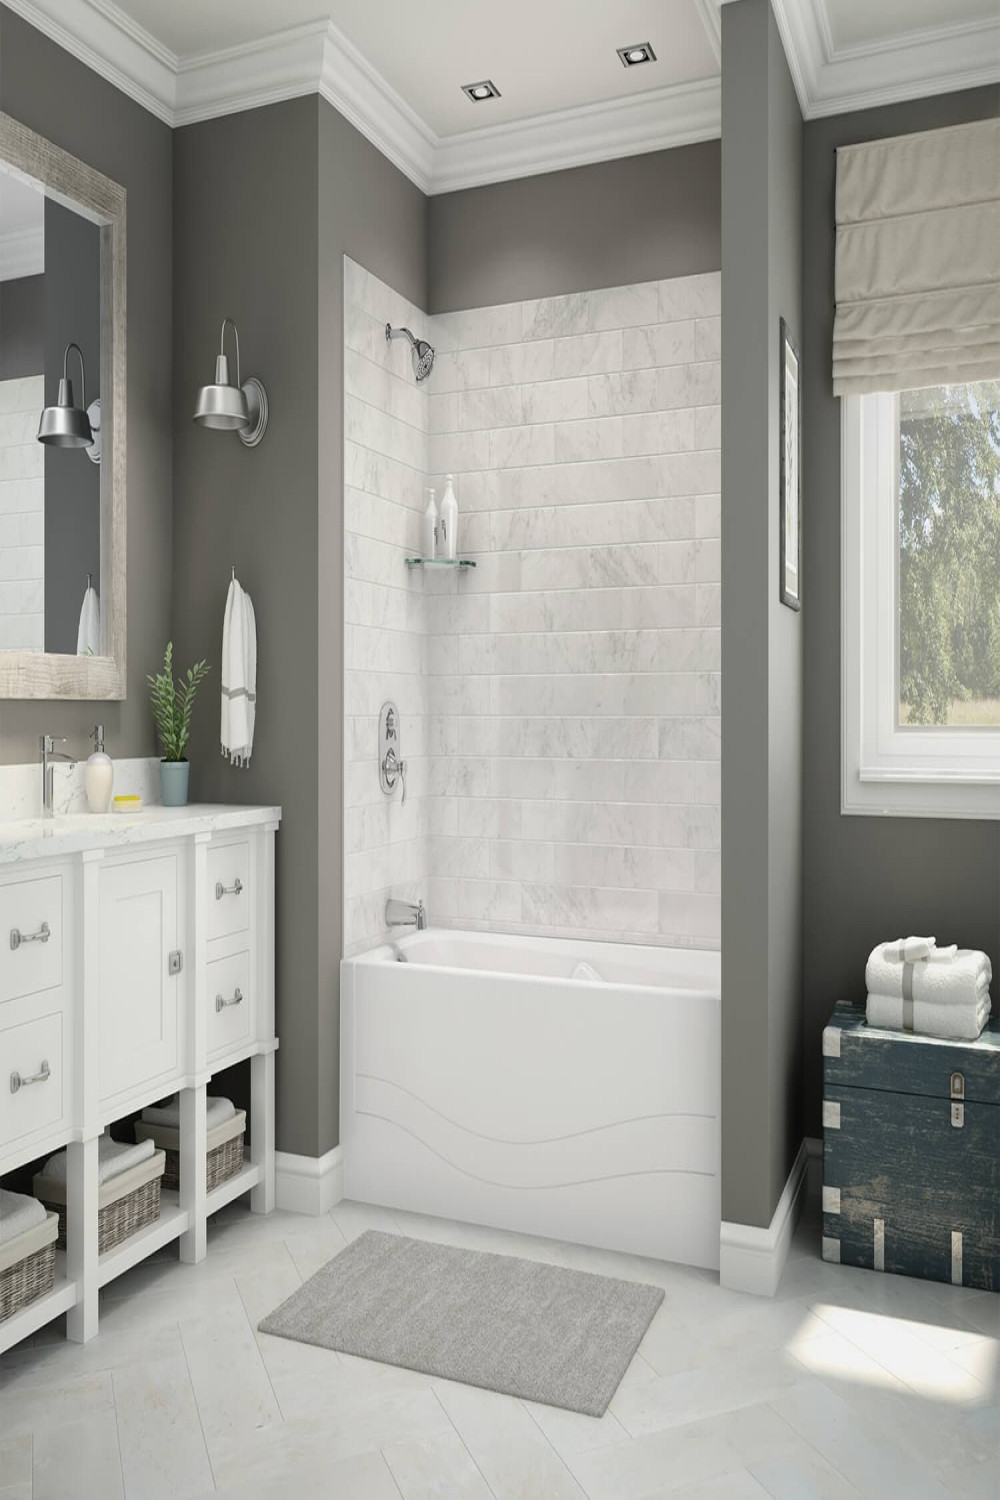 Bathtub Walls & Surrounds at Lowes